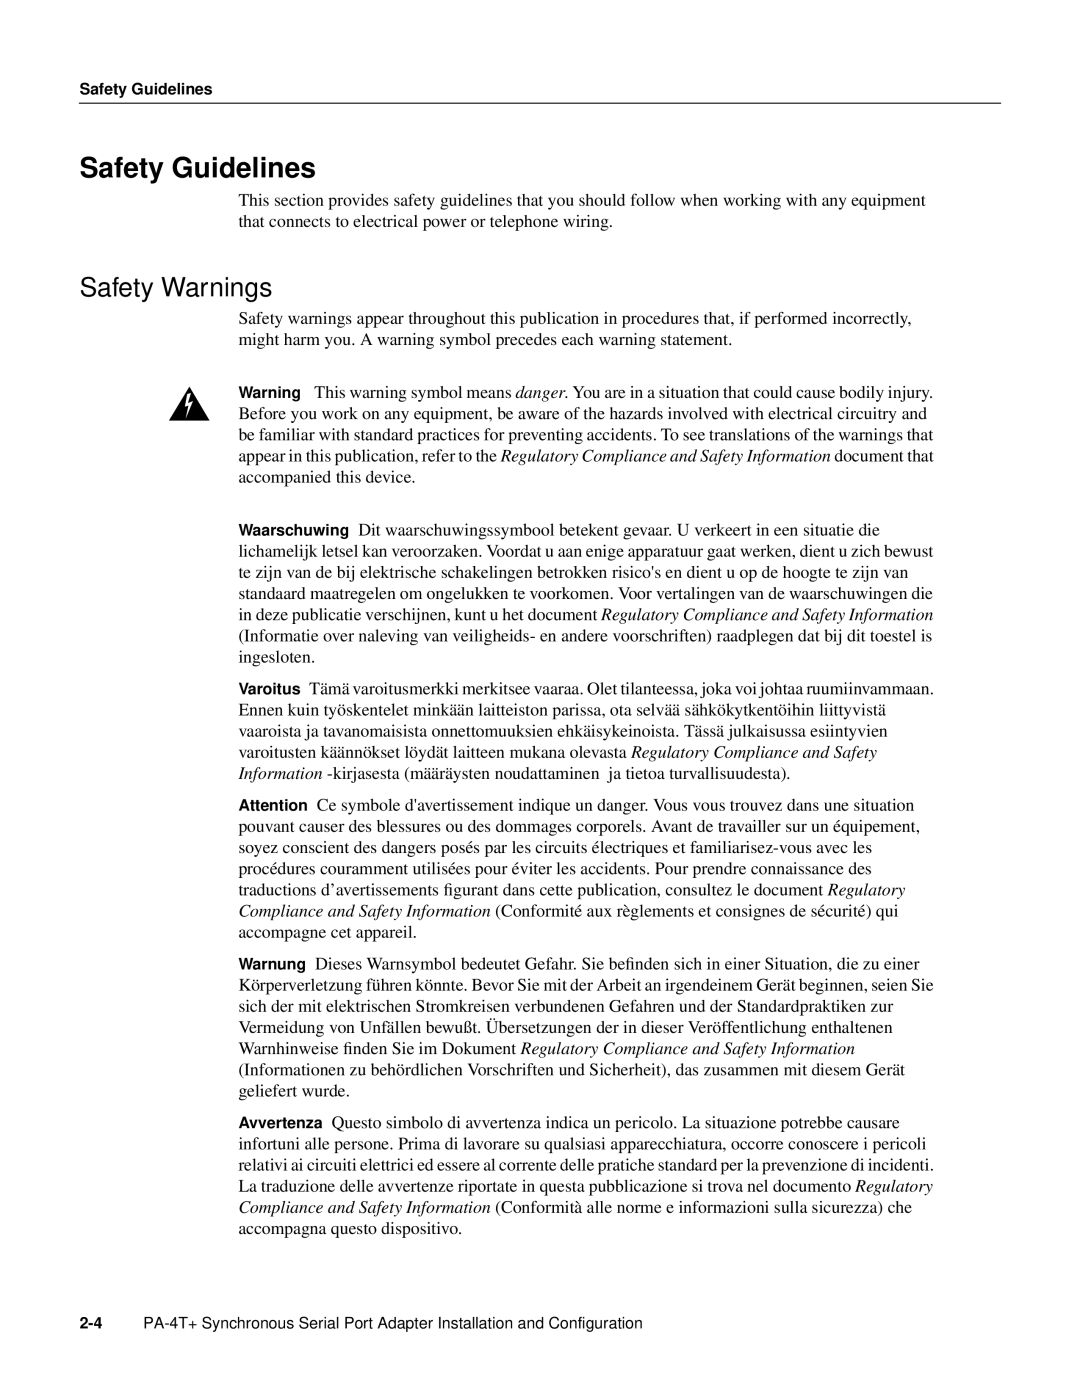 Cisco Systems PA-4T manual Safety Guidelines, Safety Warnings 